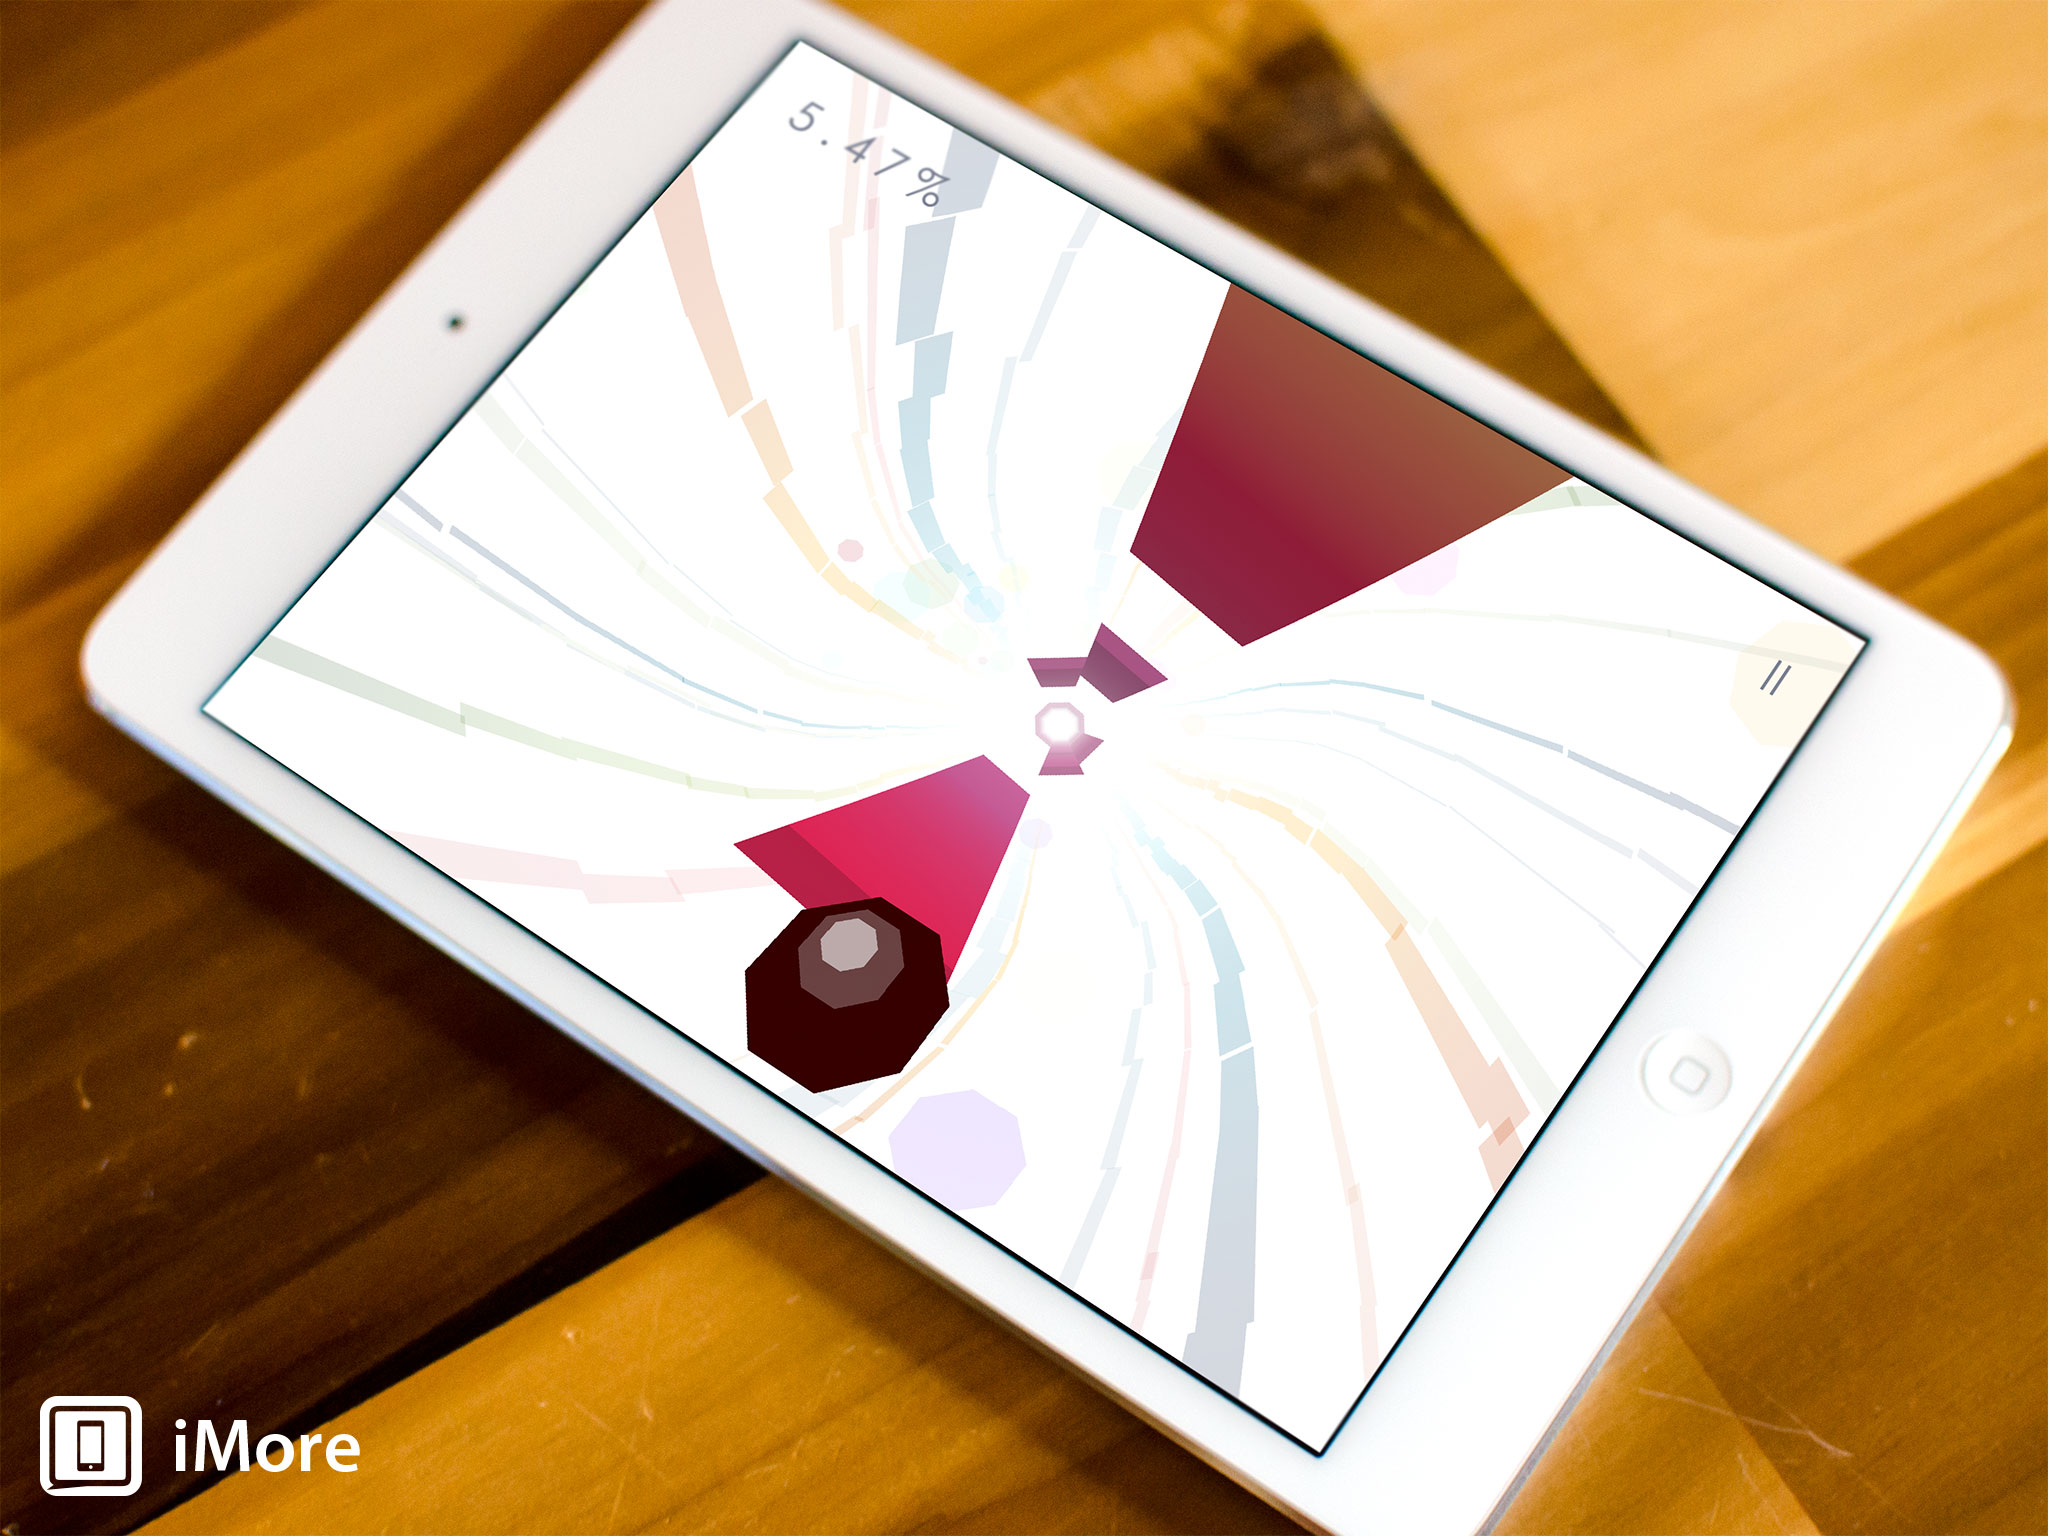 Octagon for iPhone and iPad is easy to pick up and play, but insanely addictive